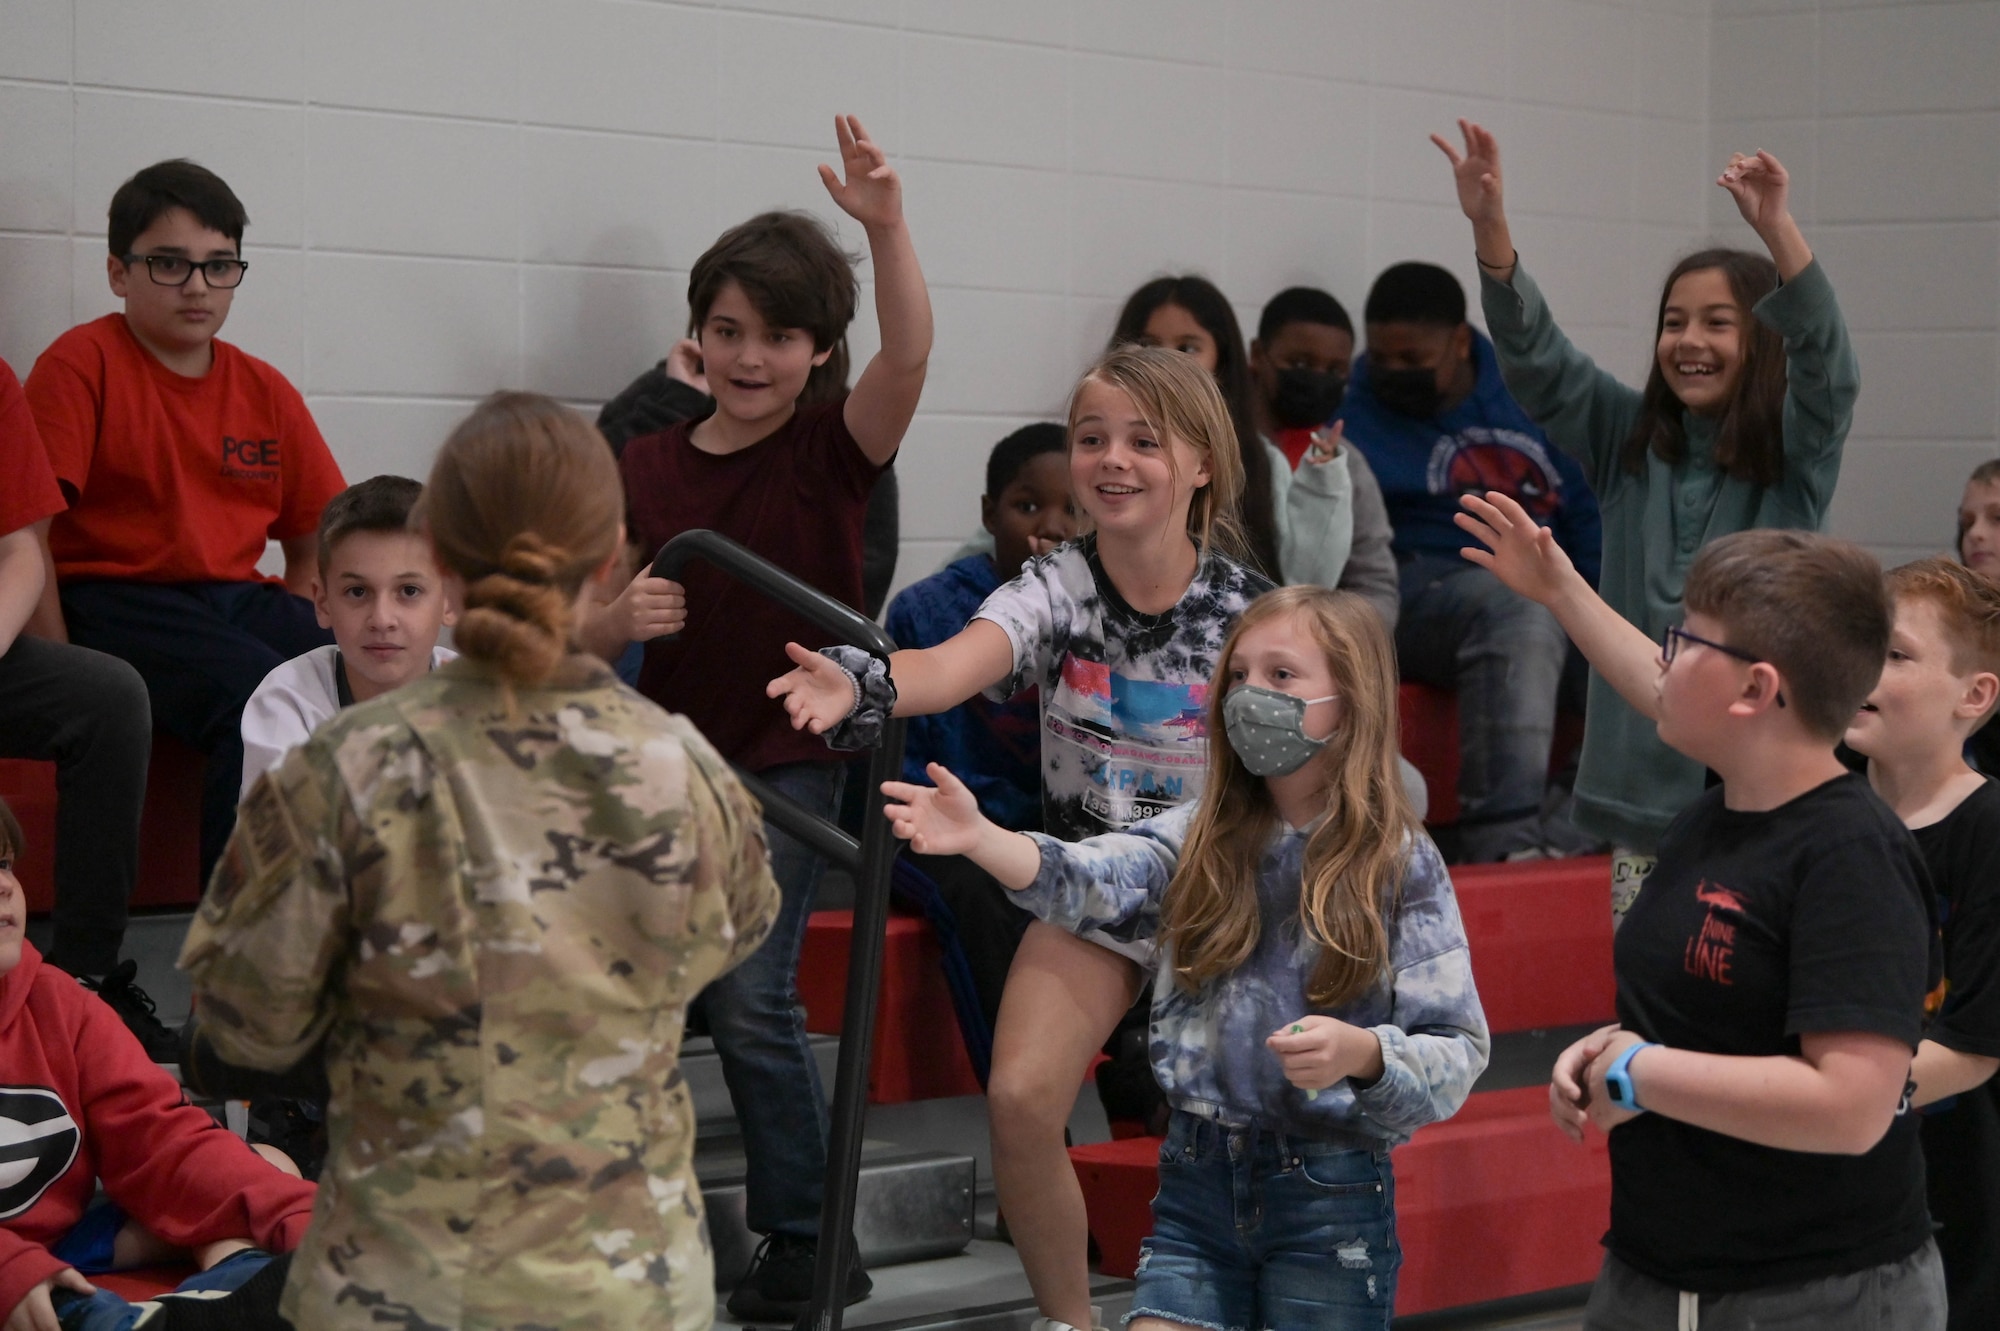 U.S. Air Force 1st Lt. Katie Tamesis, 93rd Air Ground Operations Wing public affairs officer, hands out 93rd AGOW stickers to Elementary students, March 10, 2022, at Pine Grove Elementary School, Valdosta, Georgia. Engaging with the schools gave Team Moody the opportunity to showcase the many career fields that make up the Air Force. (U.S. Air Force photo by Senior Airman Rebeckah Medeiros)